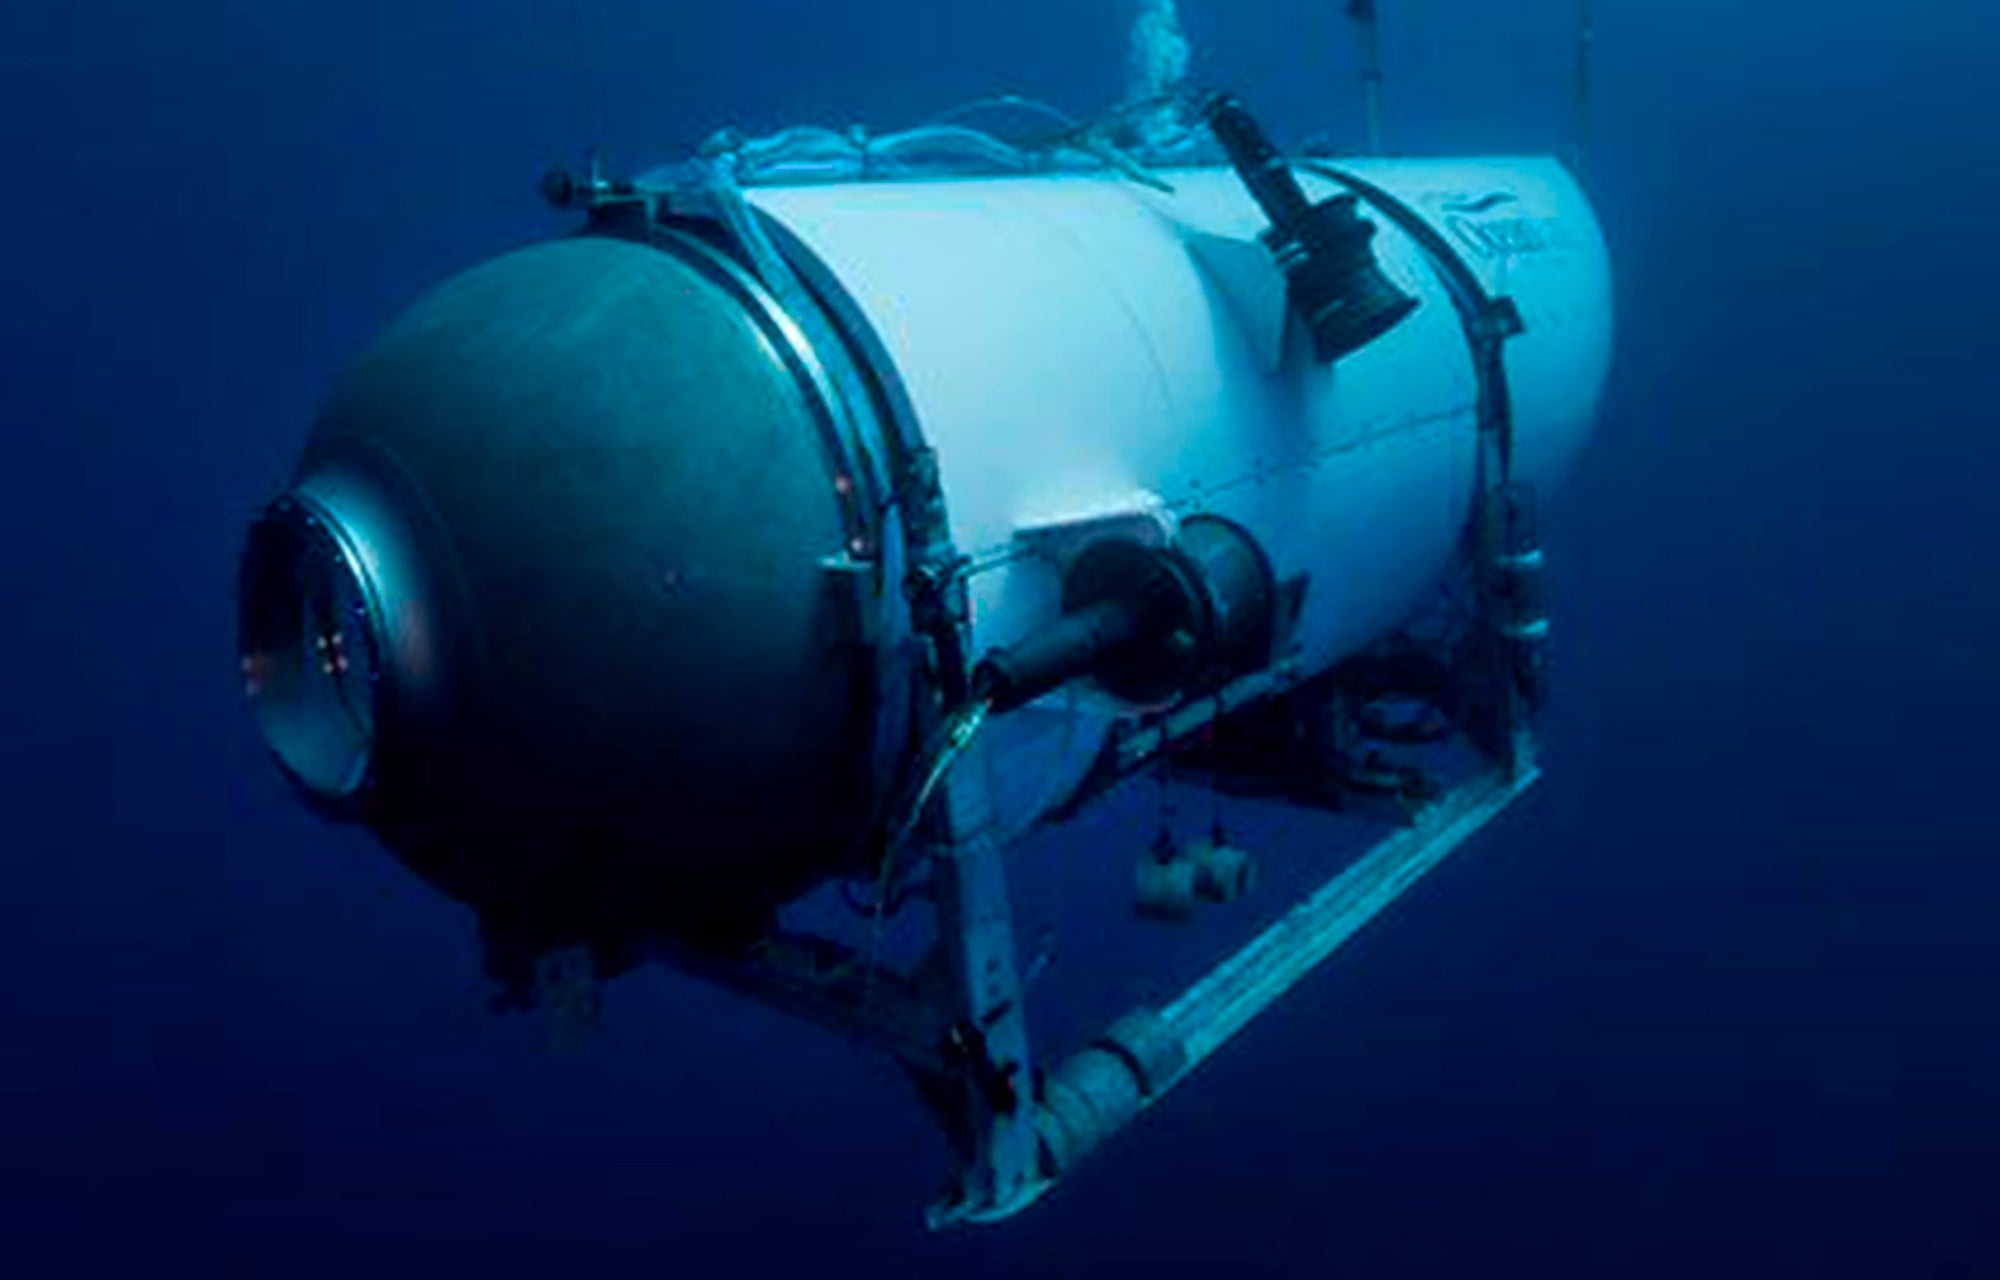 The Titan submarine killed five people when it blew up last June.